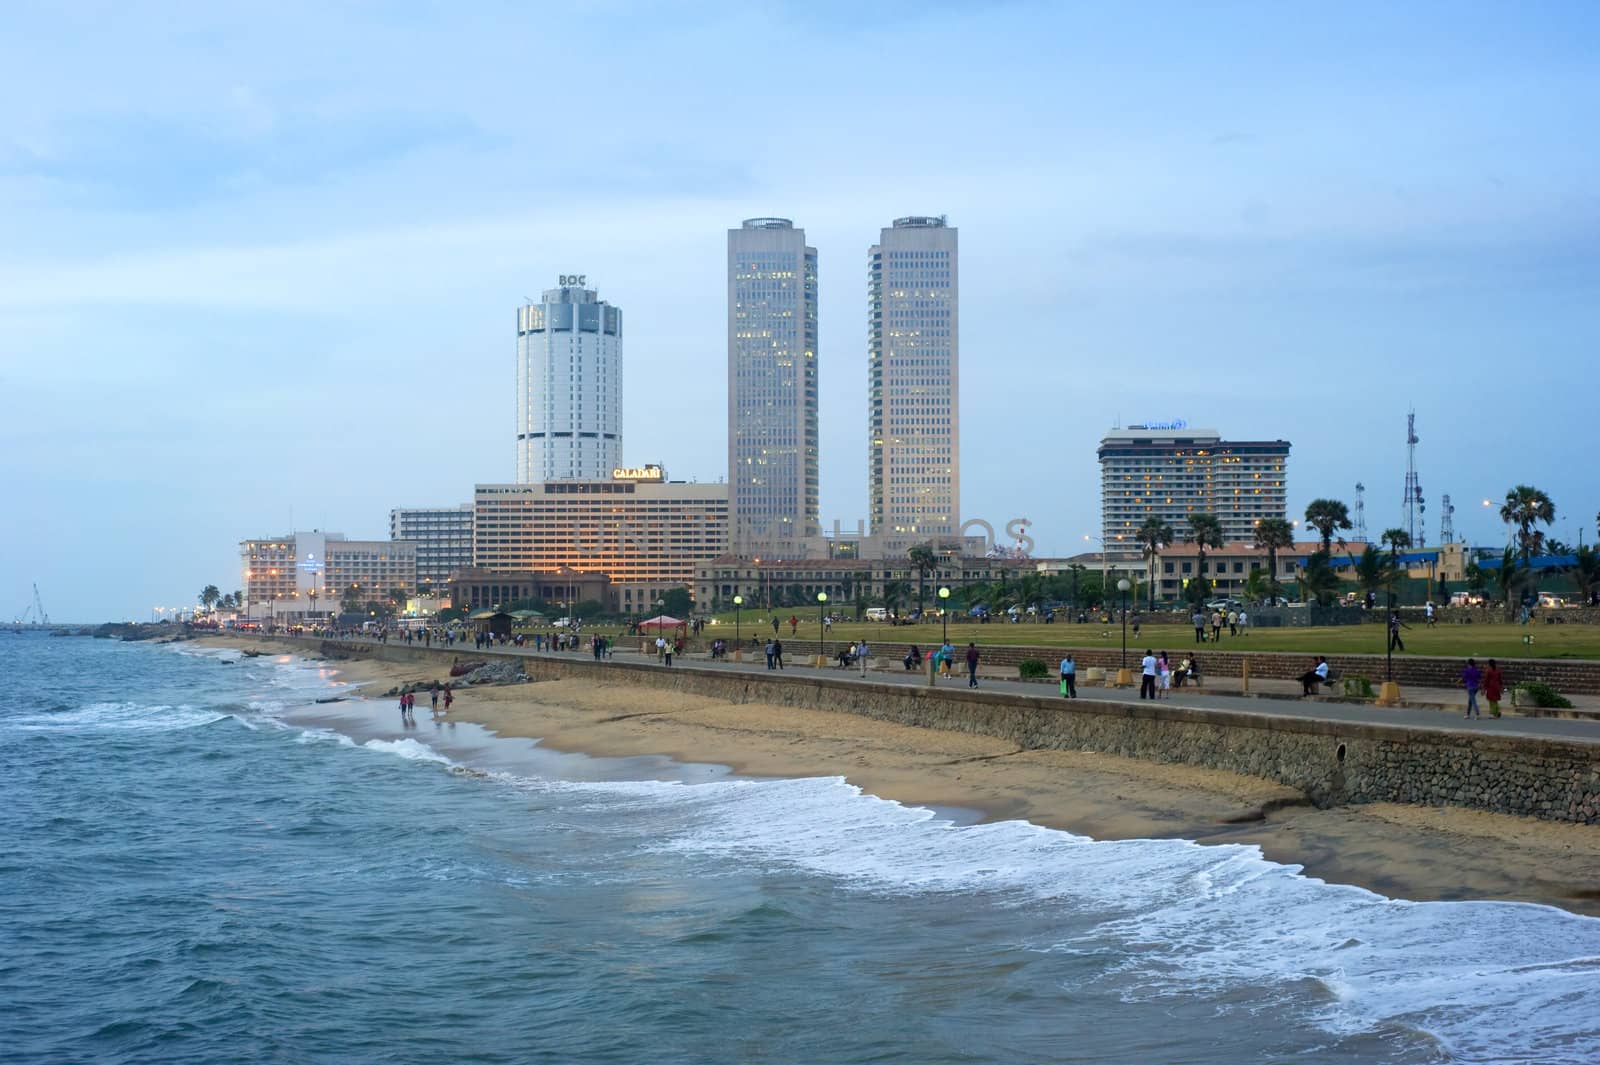 Colombo, Sri Lanka - Feb 22, 2011: Panorama of Colombo in the evening. Colombo is the largest city and former capital of Sri Lanka with population about 1 million people.